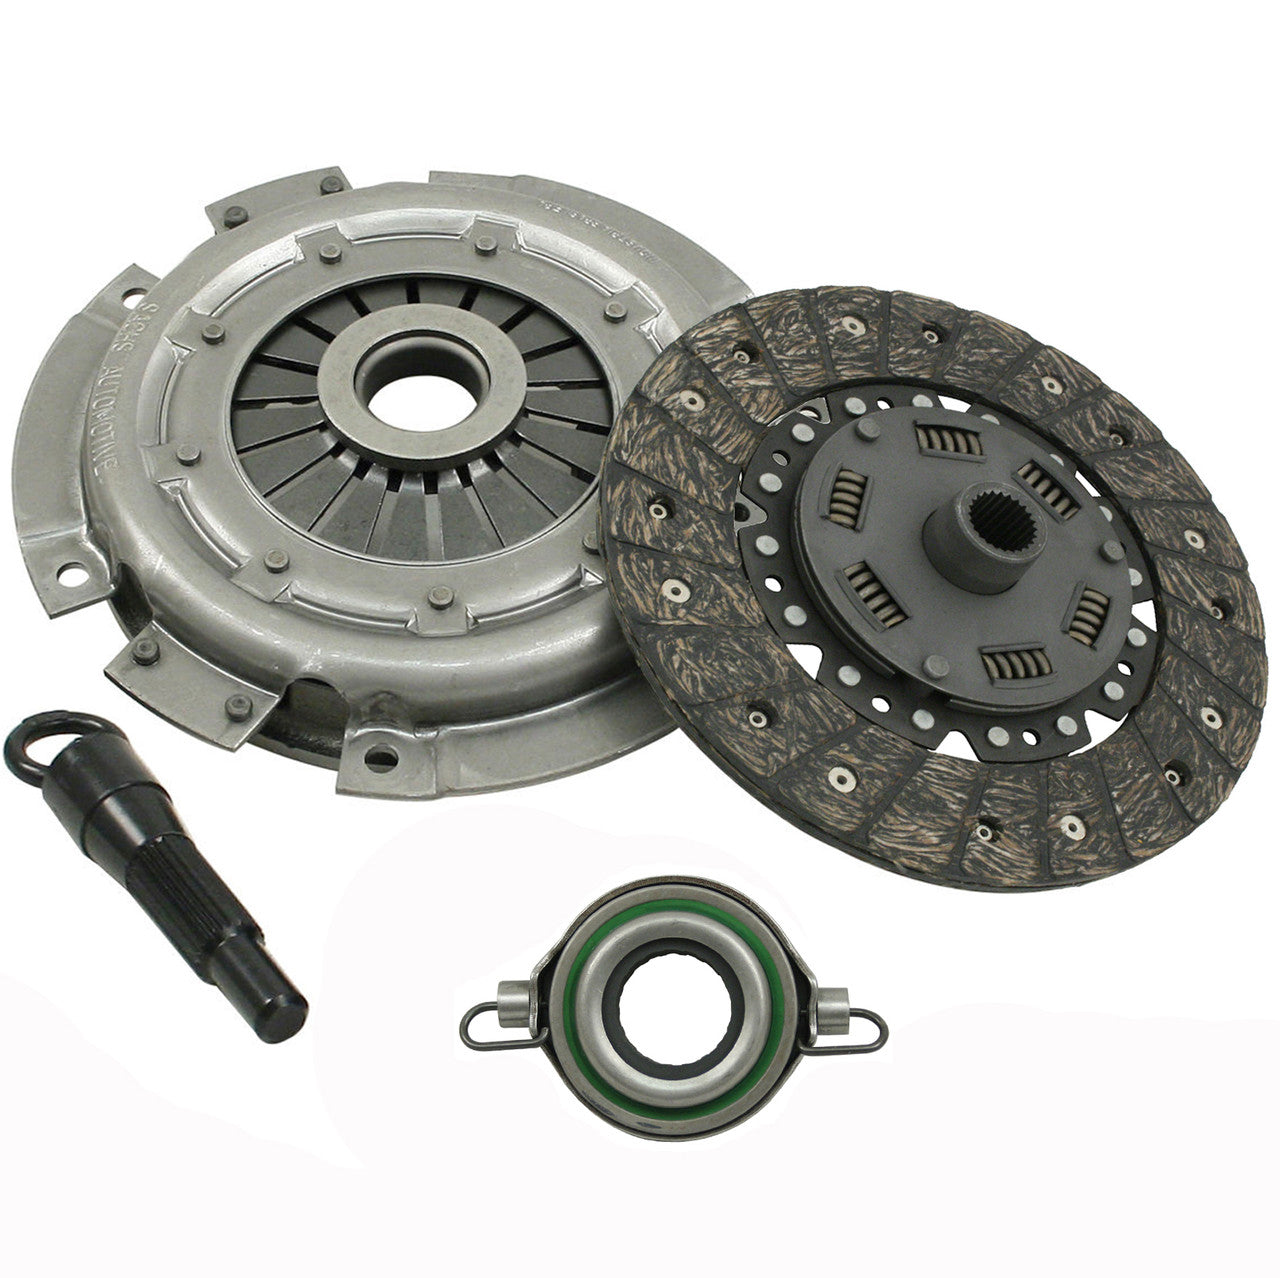 Empi 32-1258-B Complete 200mm/8" Clutch Kit W/ Sachs Pressure Plate 1967-70